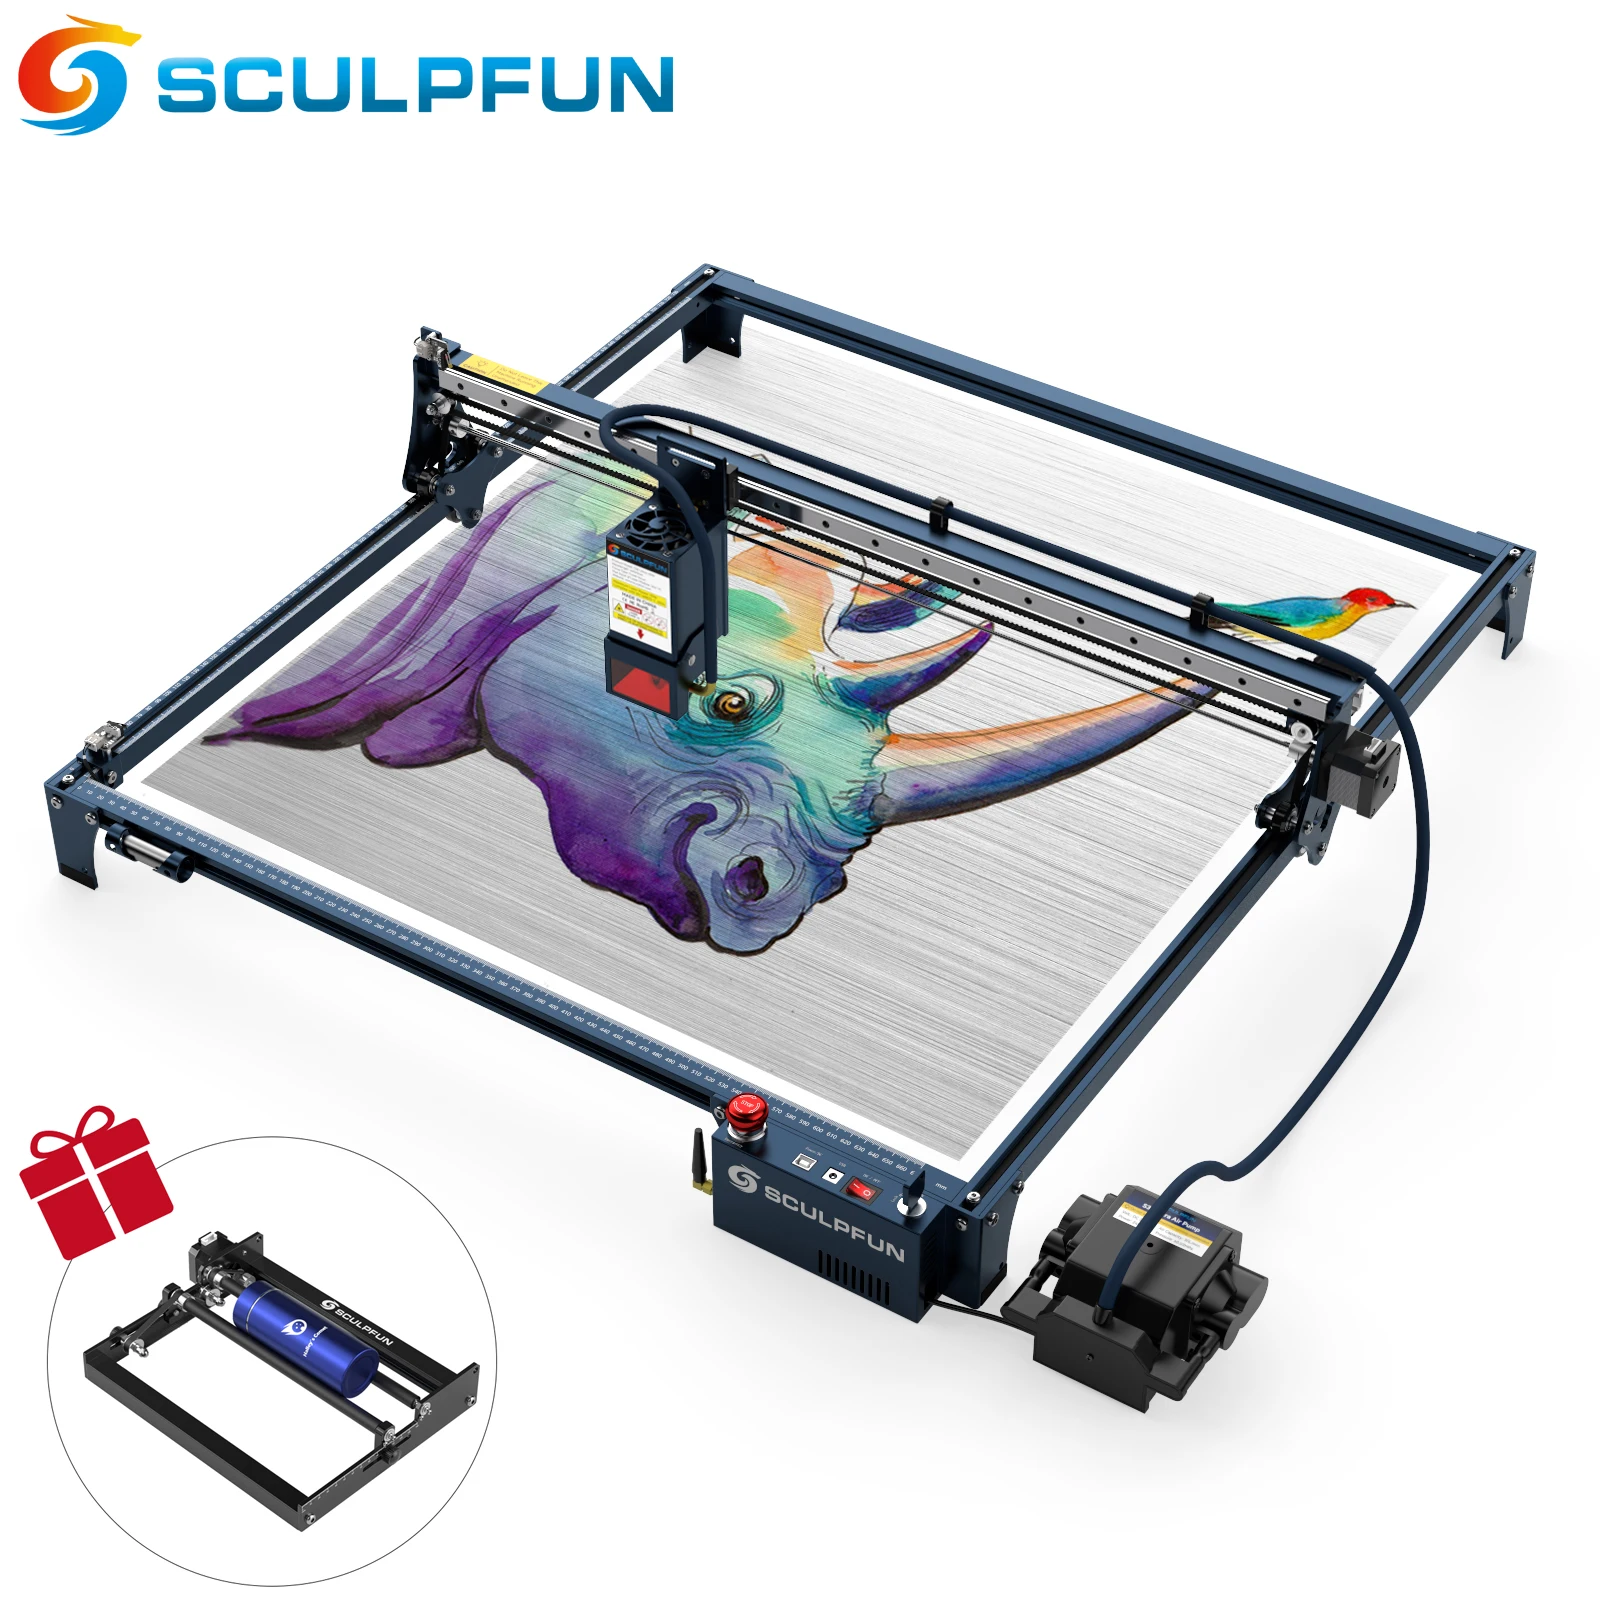 SCULPFUN S30 Ultra 11W 22W 33W Laser Engraving Machine 600x600mm Work Area Laser Cutter Engraver With Replaceable Protective Len